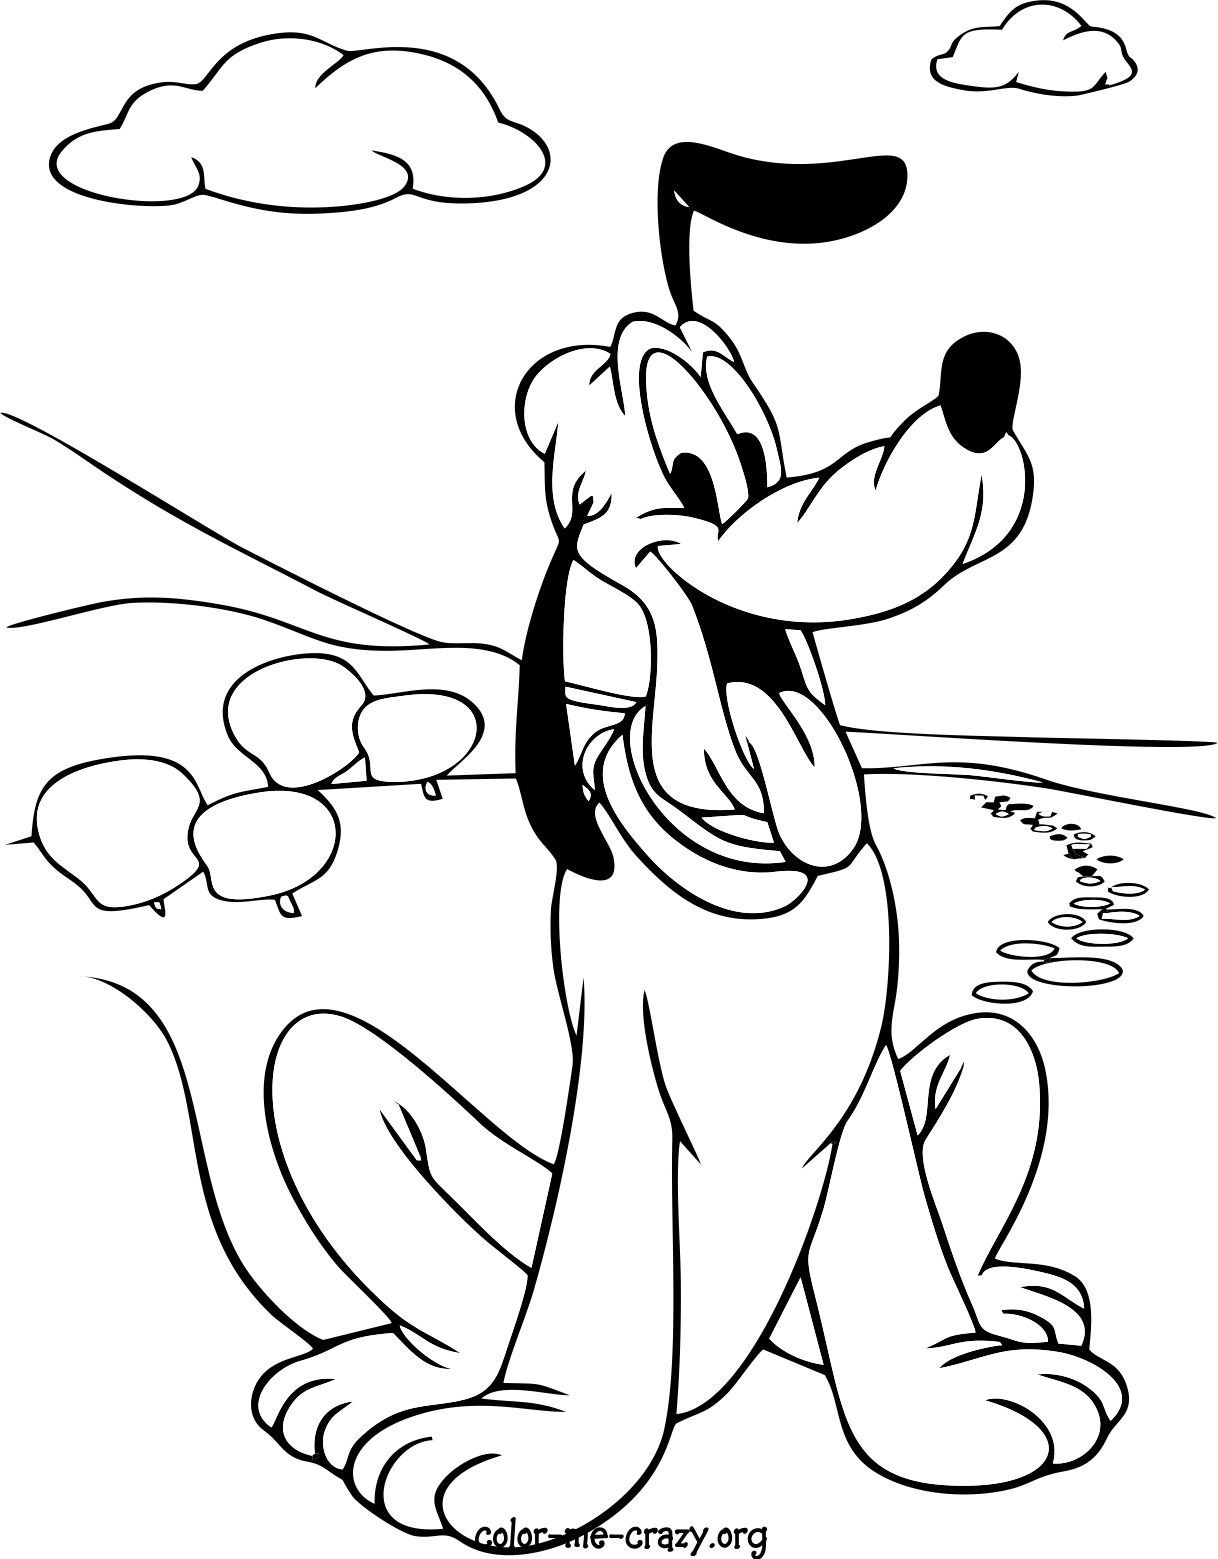 Pluto Coloring Pages Coloring Pluto Pages Planet Trasabol Wiring Diagram Database